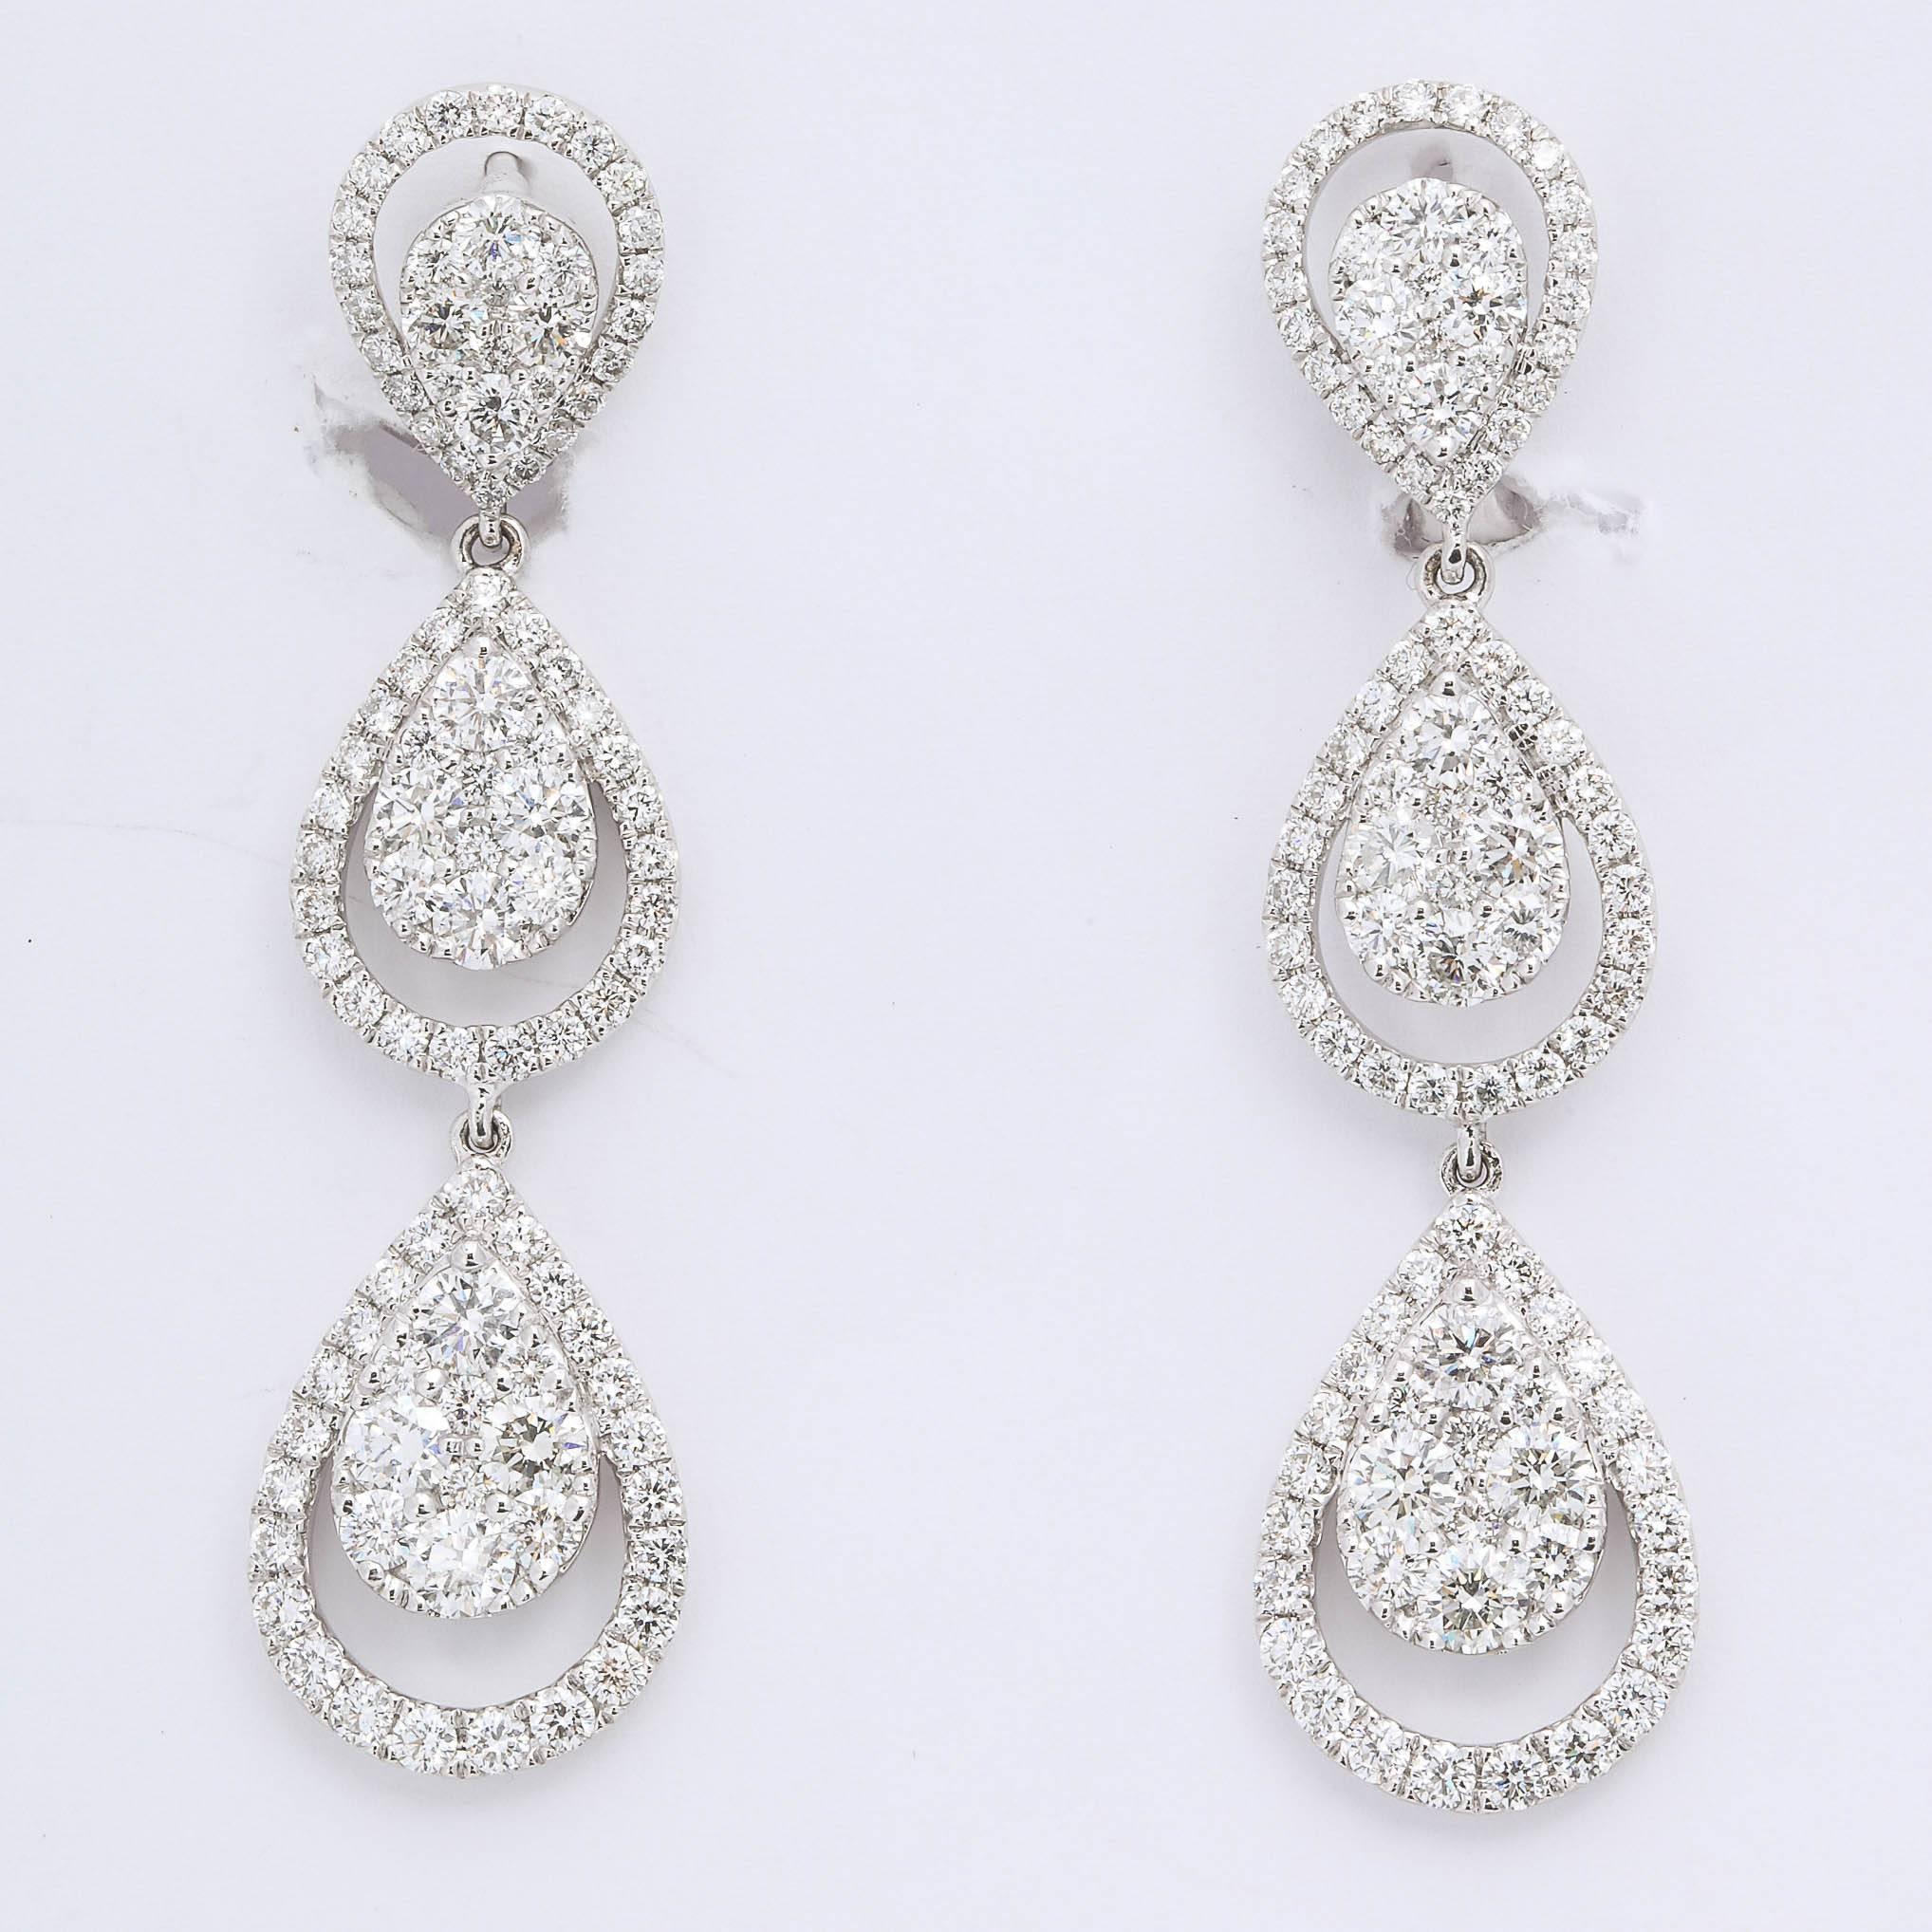 
A fashionable pair of diamond drop earrings.

4.15 carats of F color VS round brilliant cut diamonds set in 18k white gold.

Approximately 1.88 inches in length. 